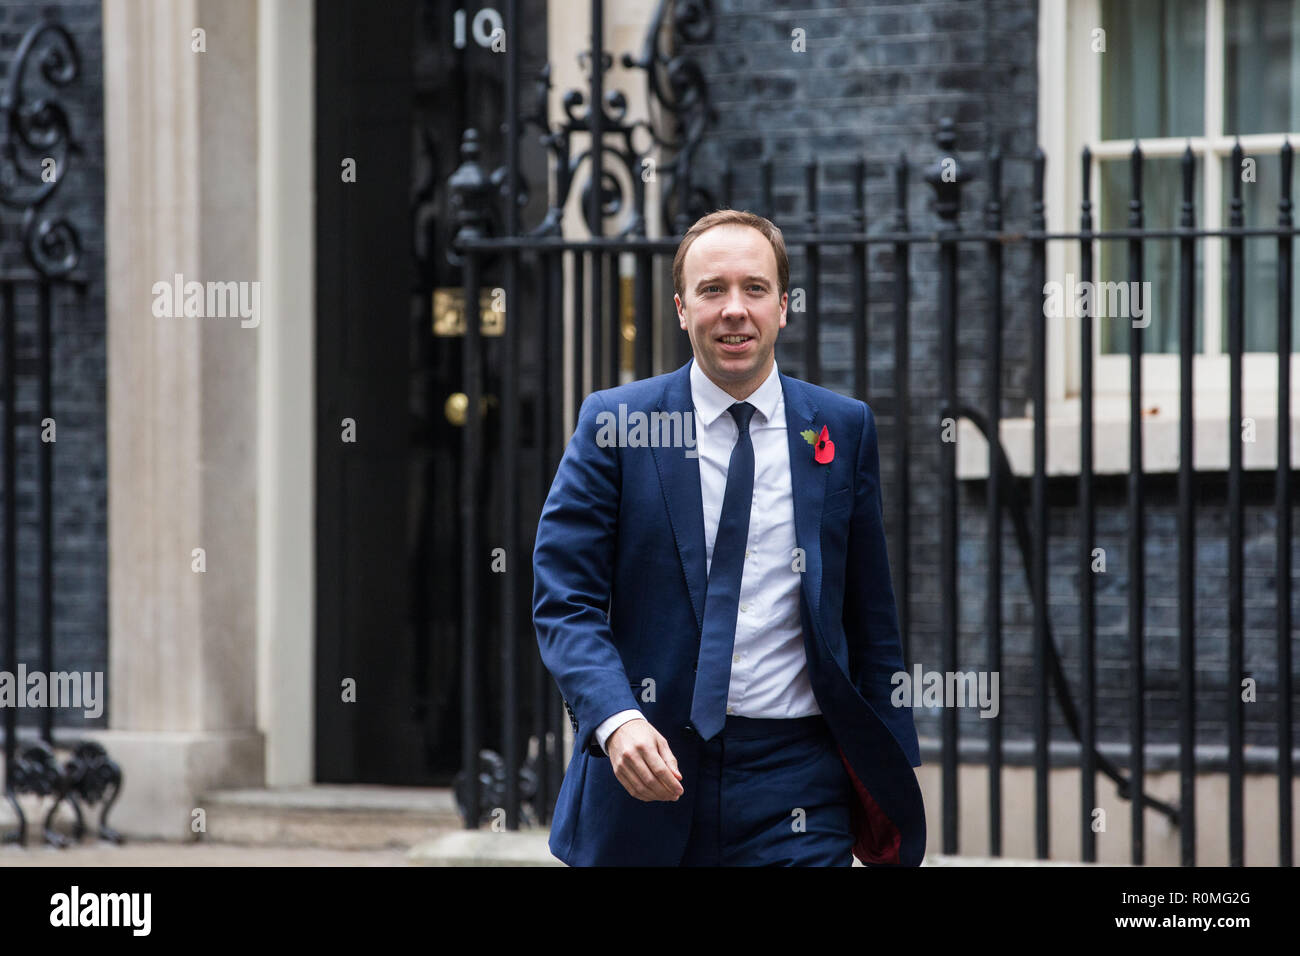 London, UK. 6th November, 2018. Matt Hancock MP, Secretary of State for Health and Social Care, leaves 10 Downing Street following a Cabinet meeting during which the Prime Minister was expected to update ministers on the current status of Brexit negotiations with a view to working towards a special Brexit summit in the final week of November. Credit: Mark Kerrison/Alamy Live News Stock Photo